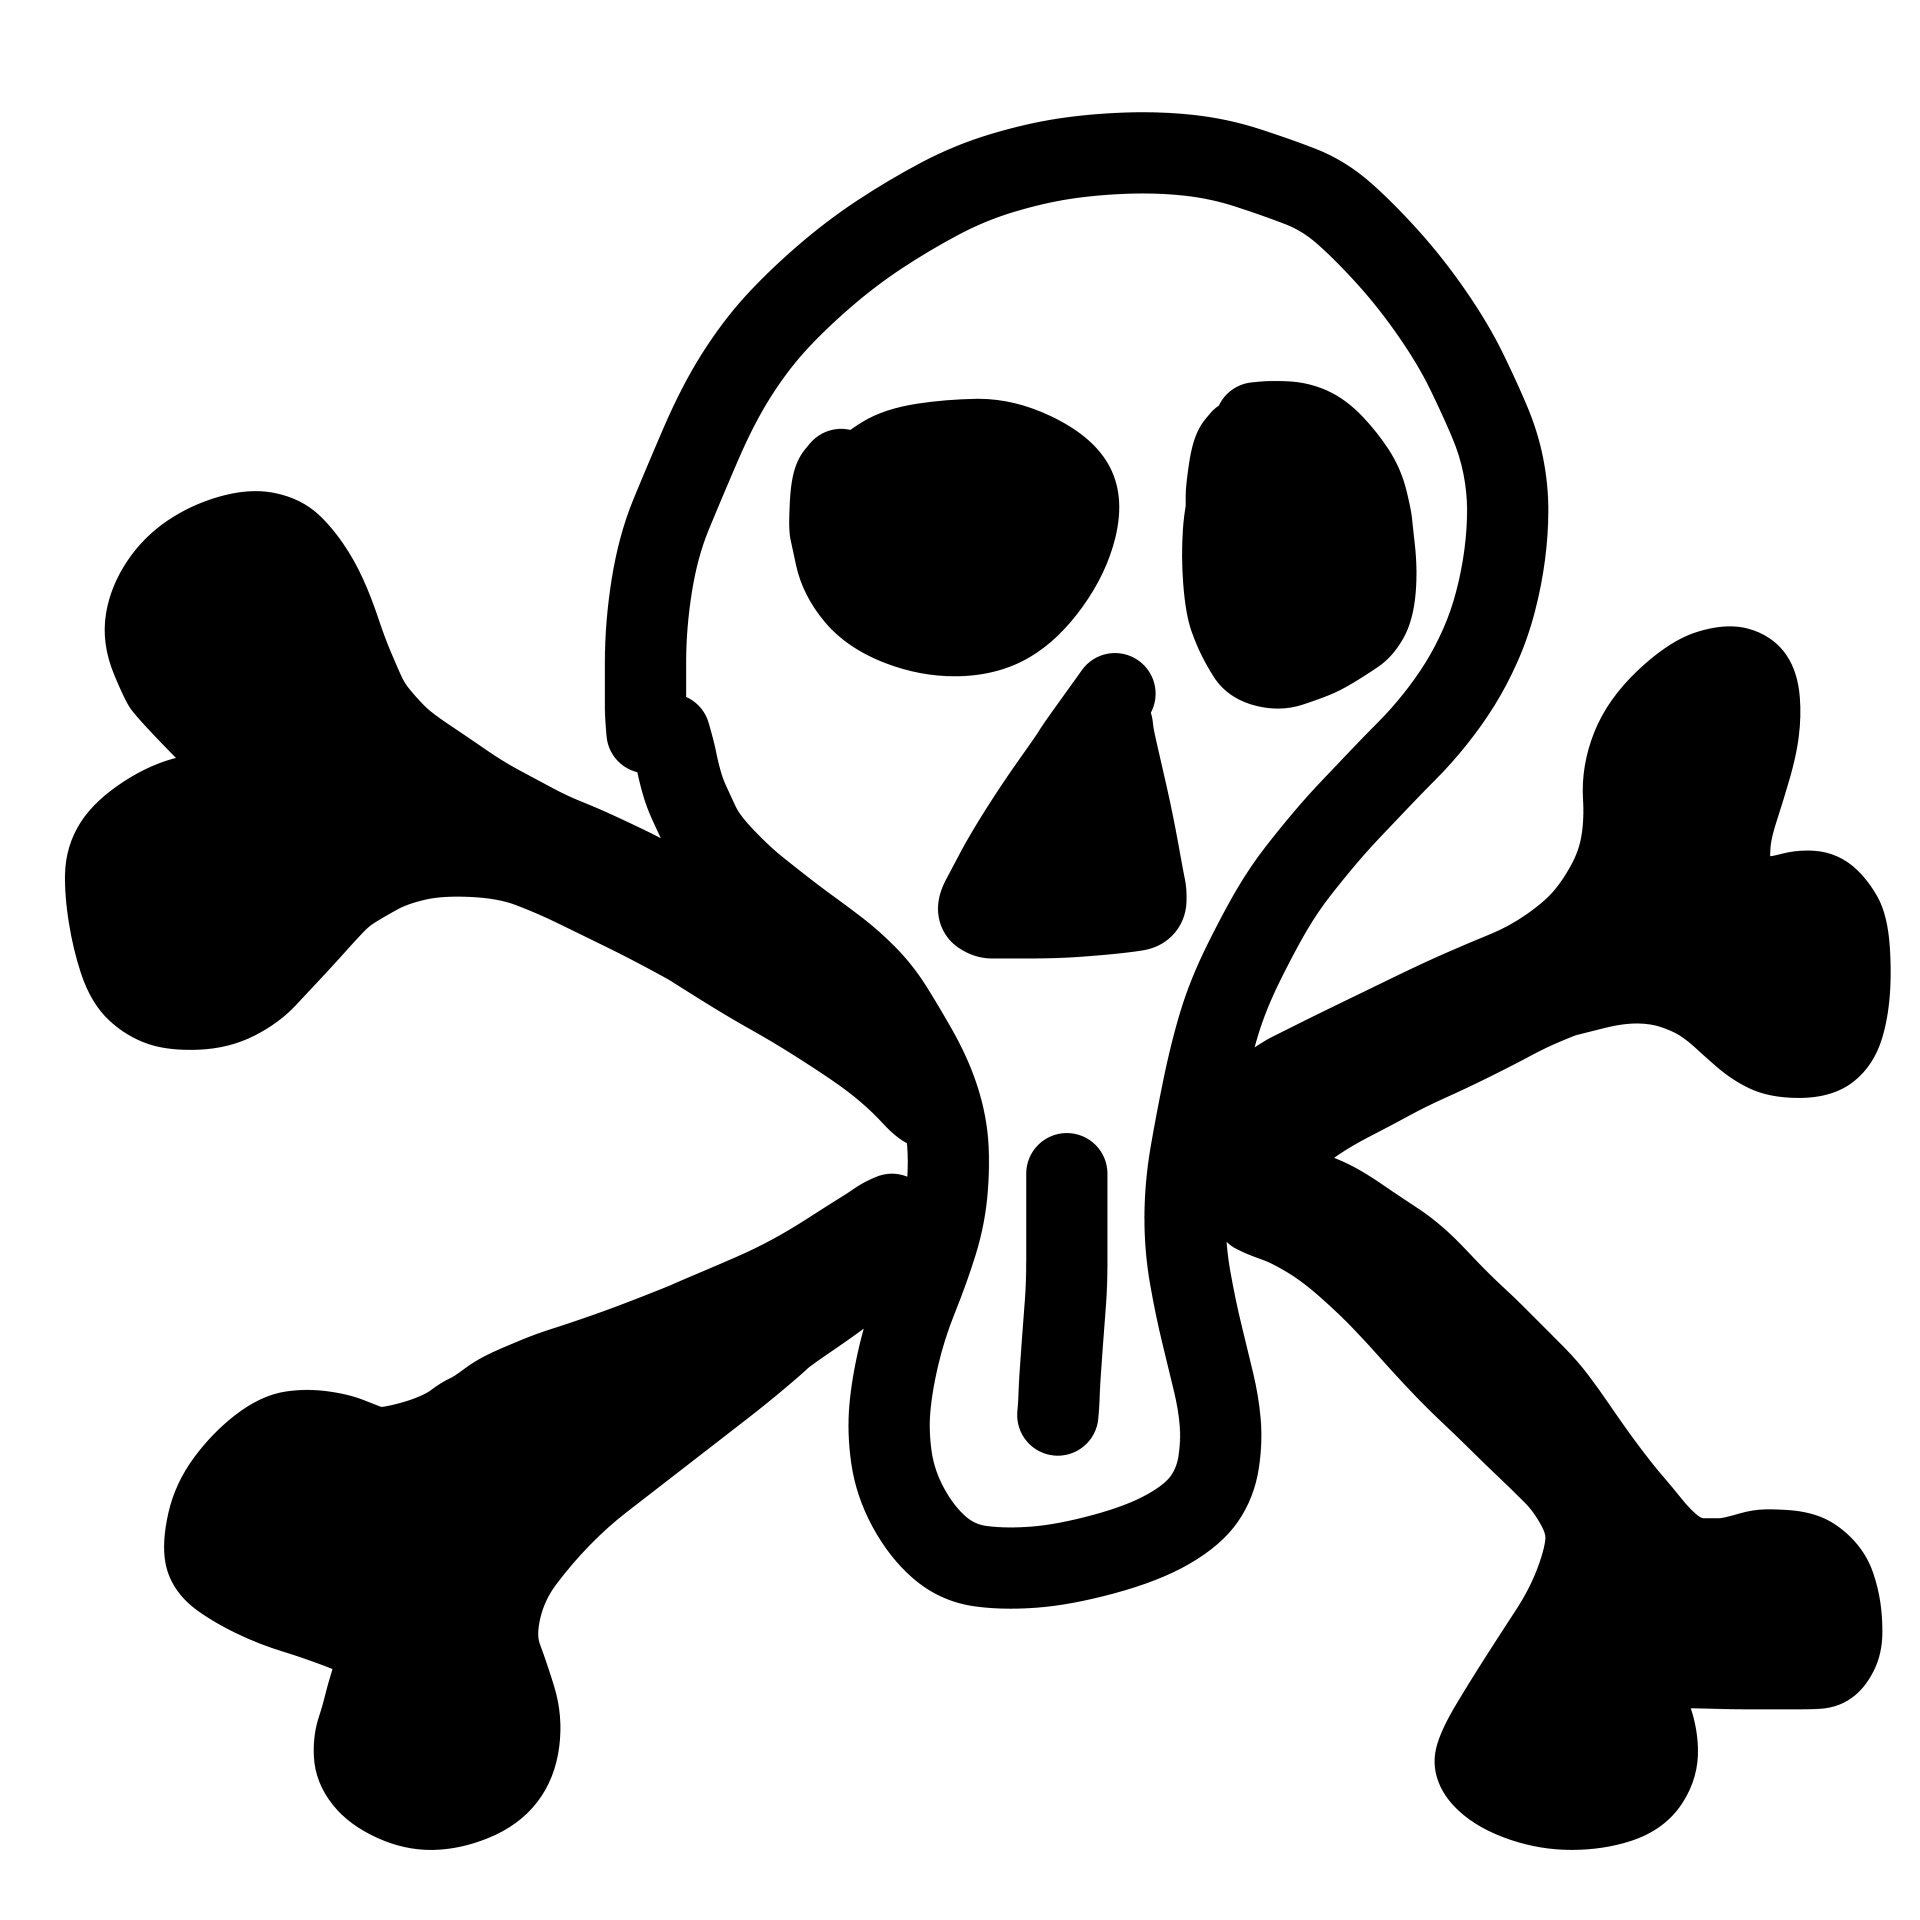 Download A Black Background With A Black Skull And Crossbones